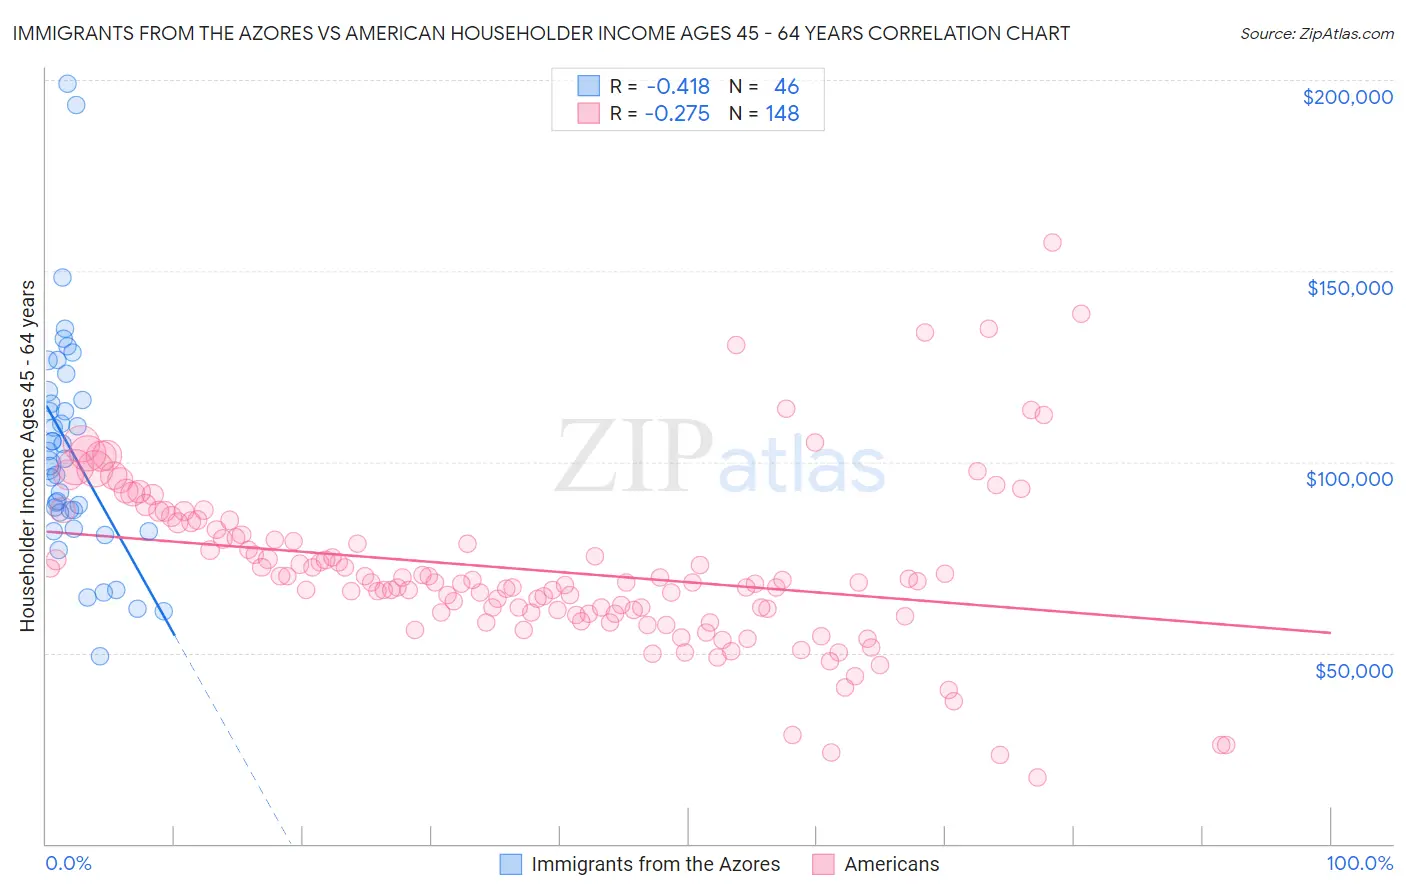 Immigrants from the Azores vs American Householder Income Ages 45 - 64 years